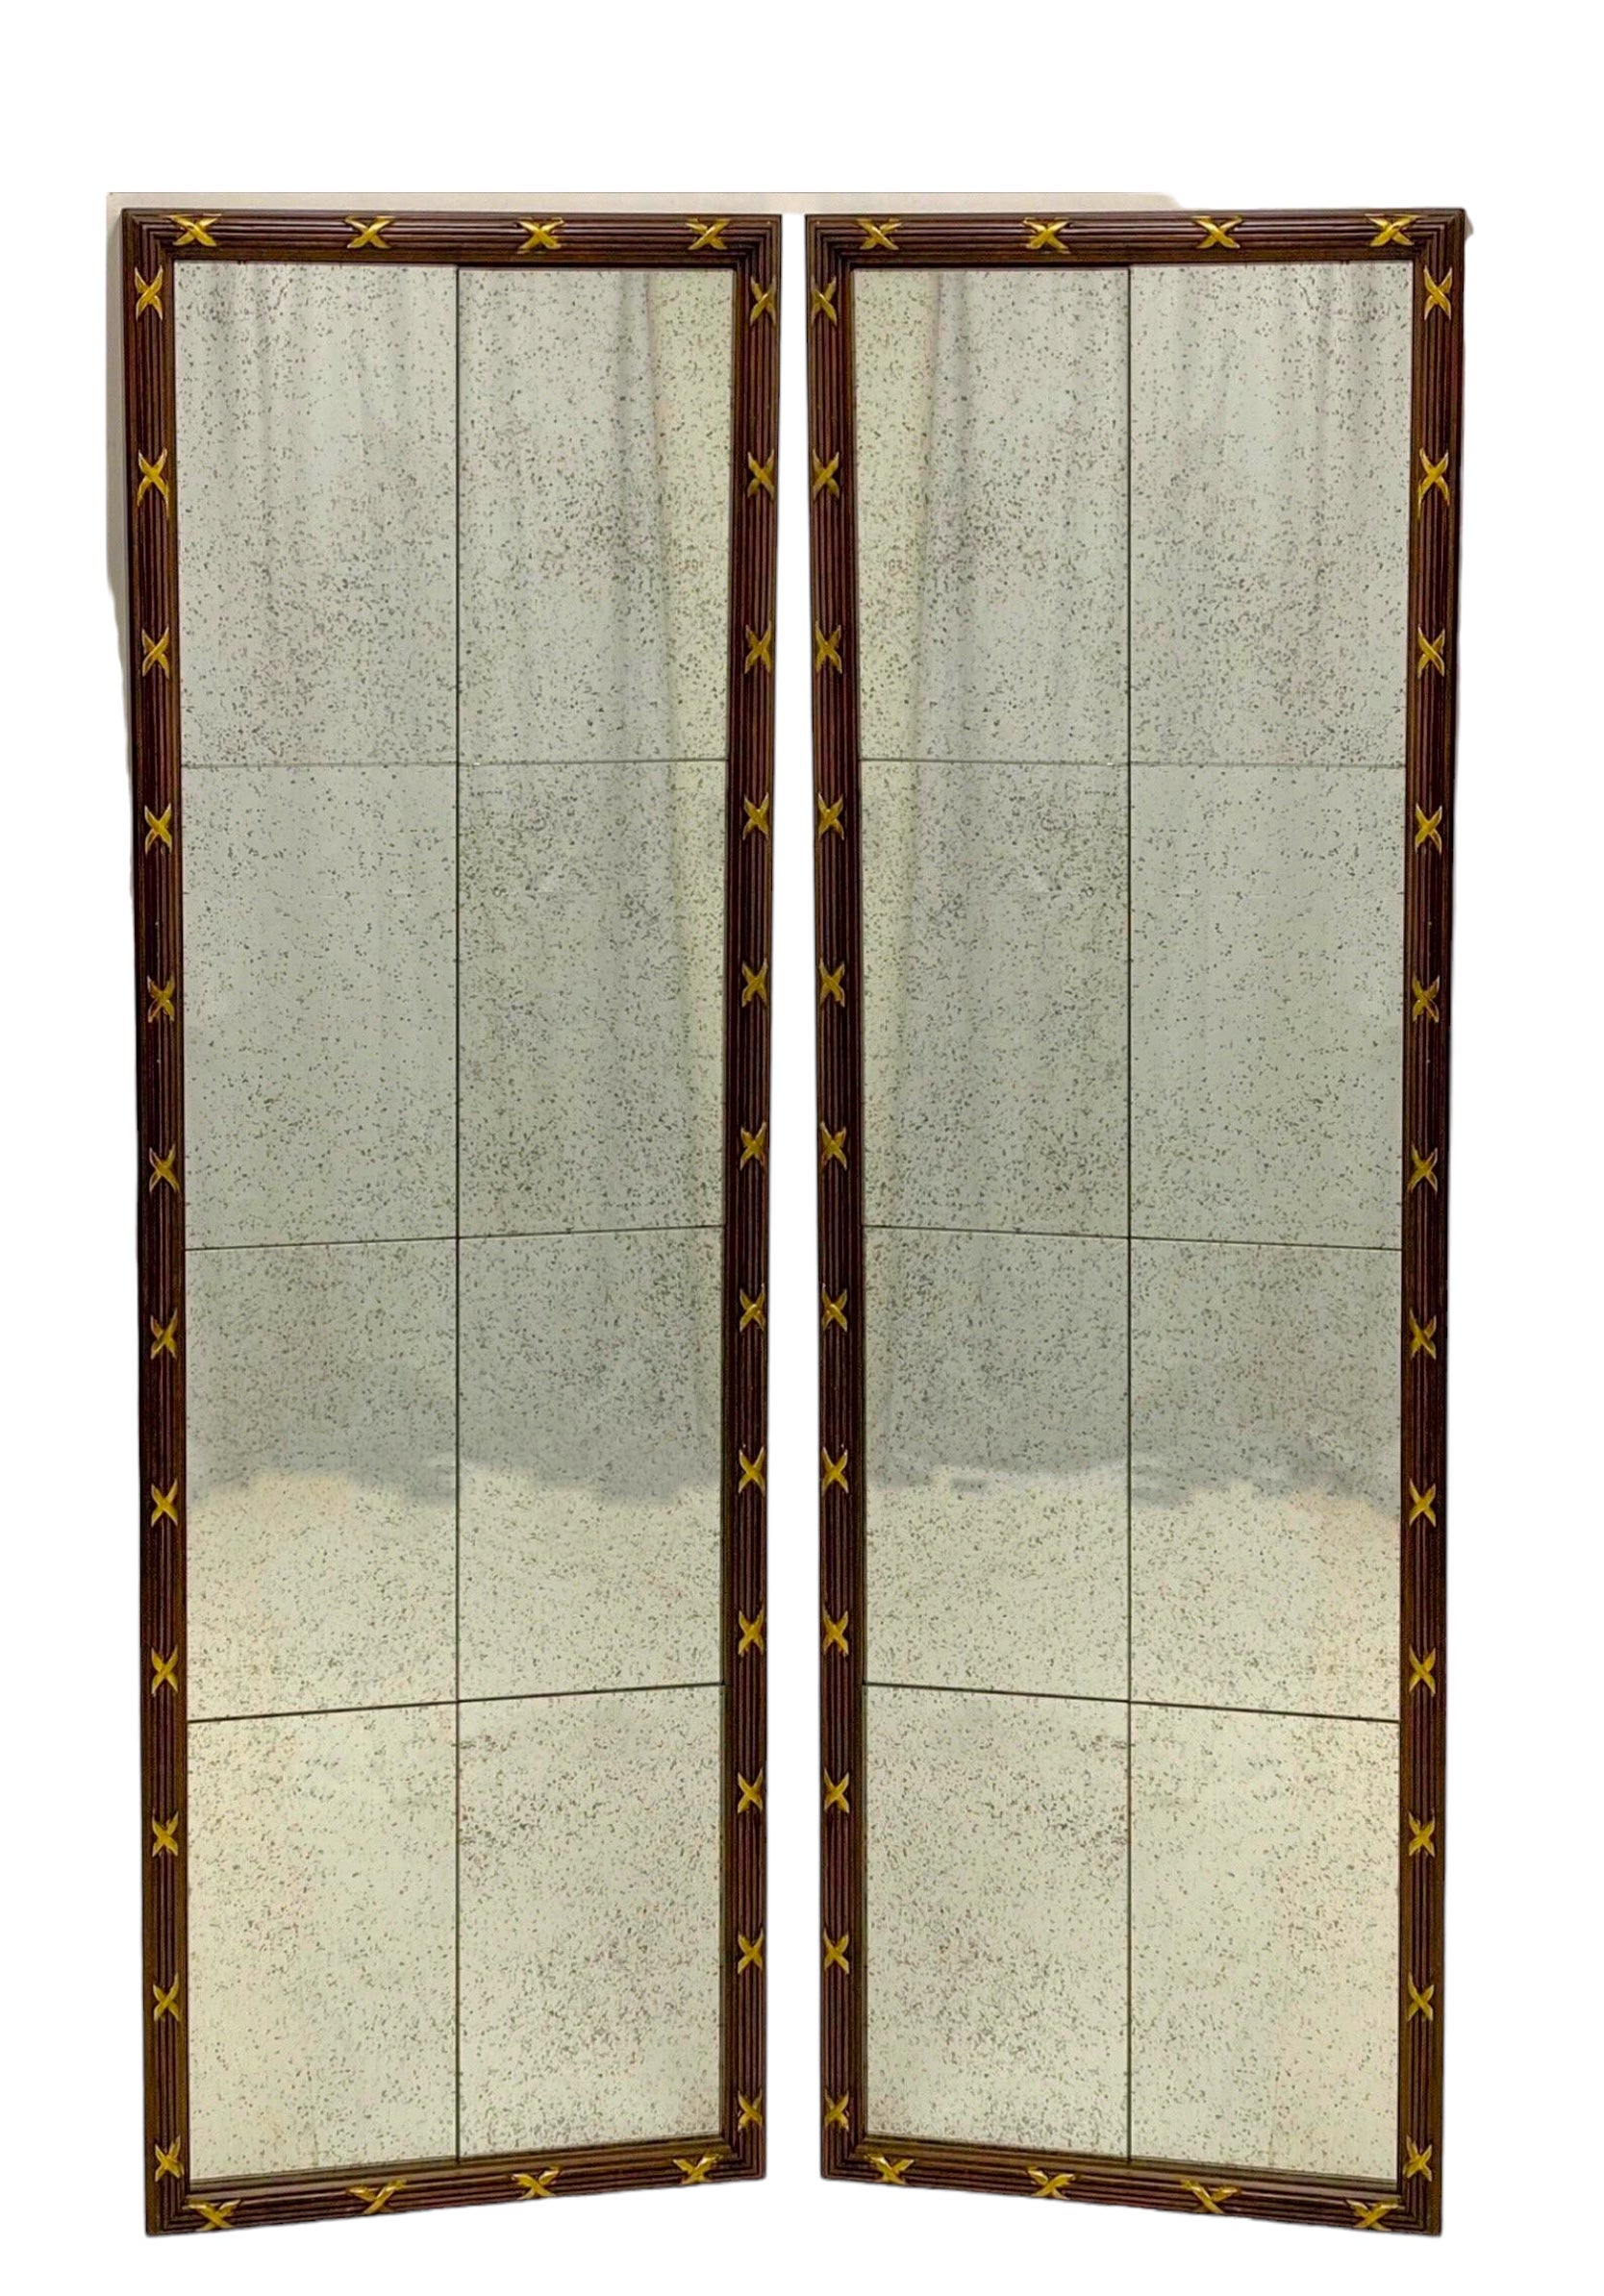 This is a pair of tall neo-classical style mirrors. The glass is intentionally distressed. The carved frame appears to be mahogany with gilt accents. They are unmarked.